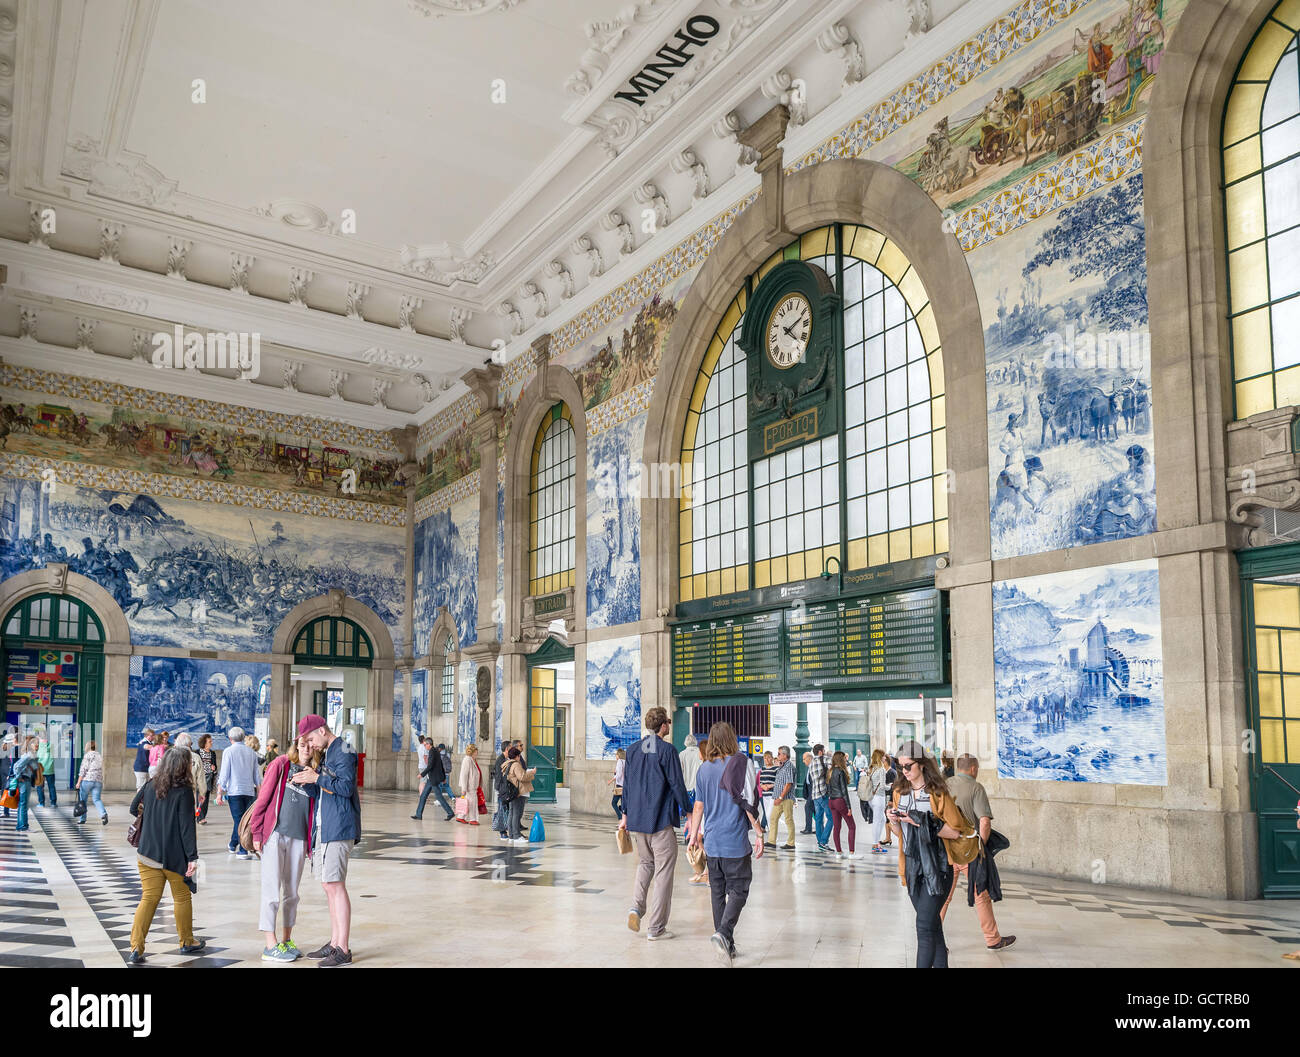 Travellers in the interior of the historical Sao Bento train station in Porto, Portugal. Stock Photo